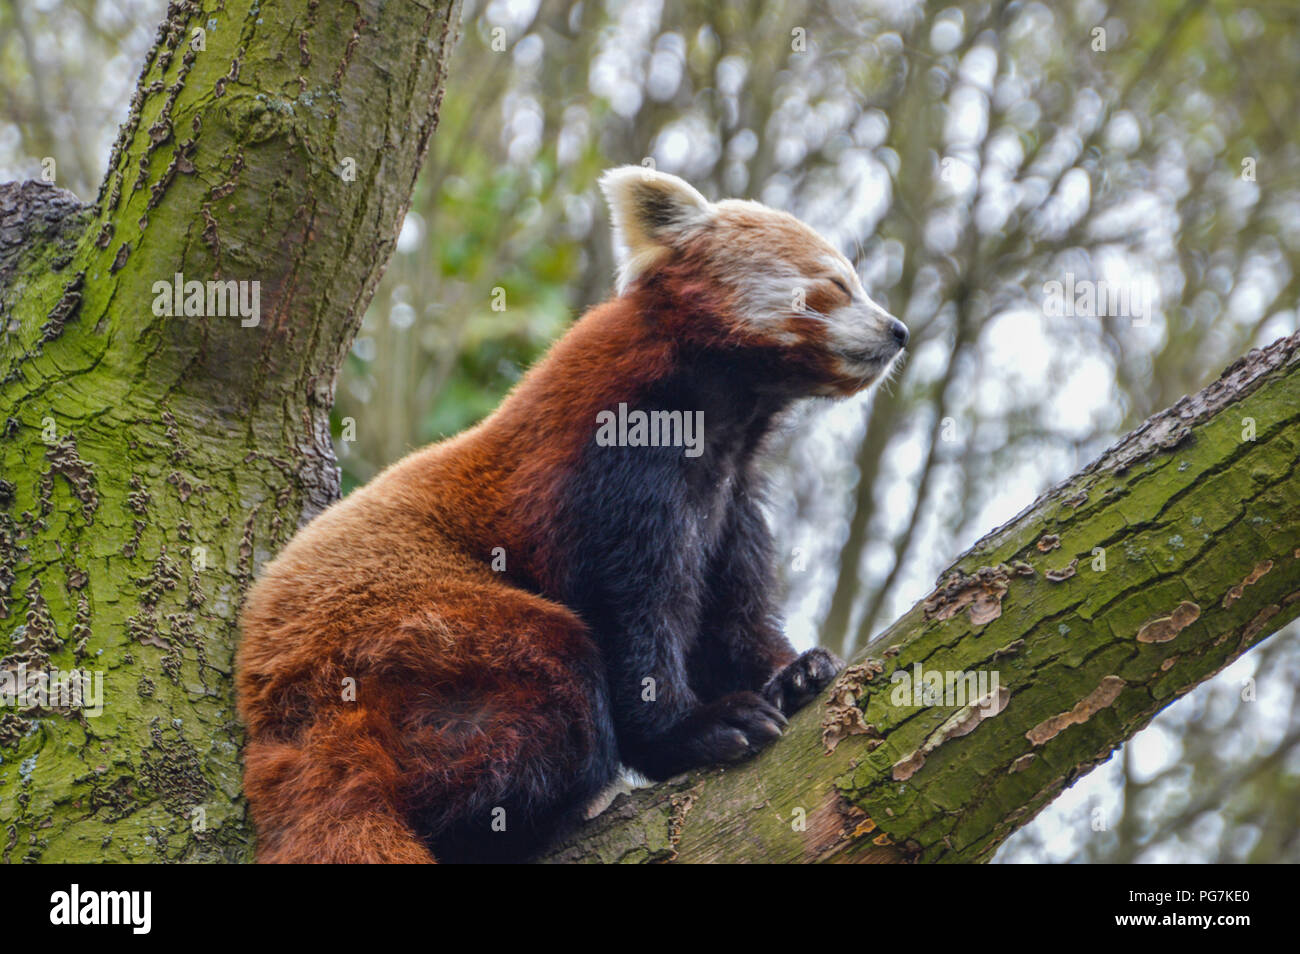 The Red Panda At Artis Zoo Amsterdam The Netherlands 2018 Stock Photo